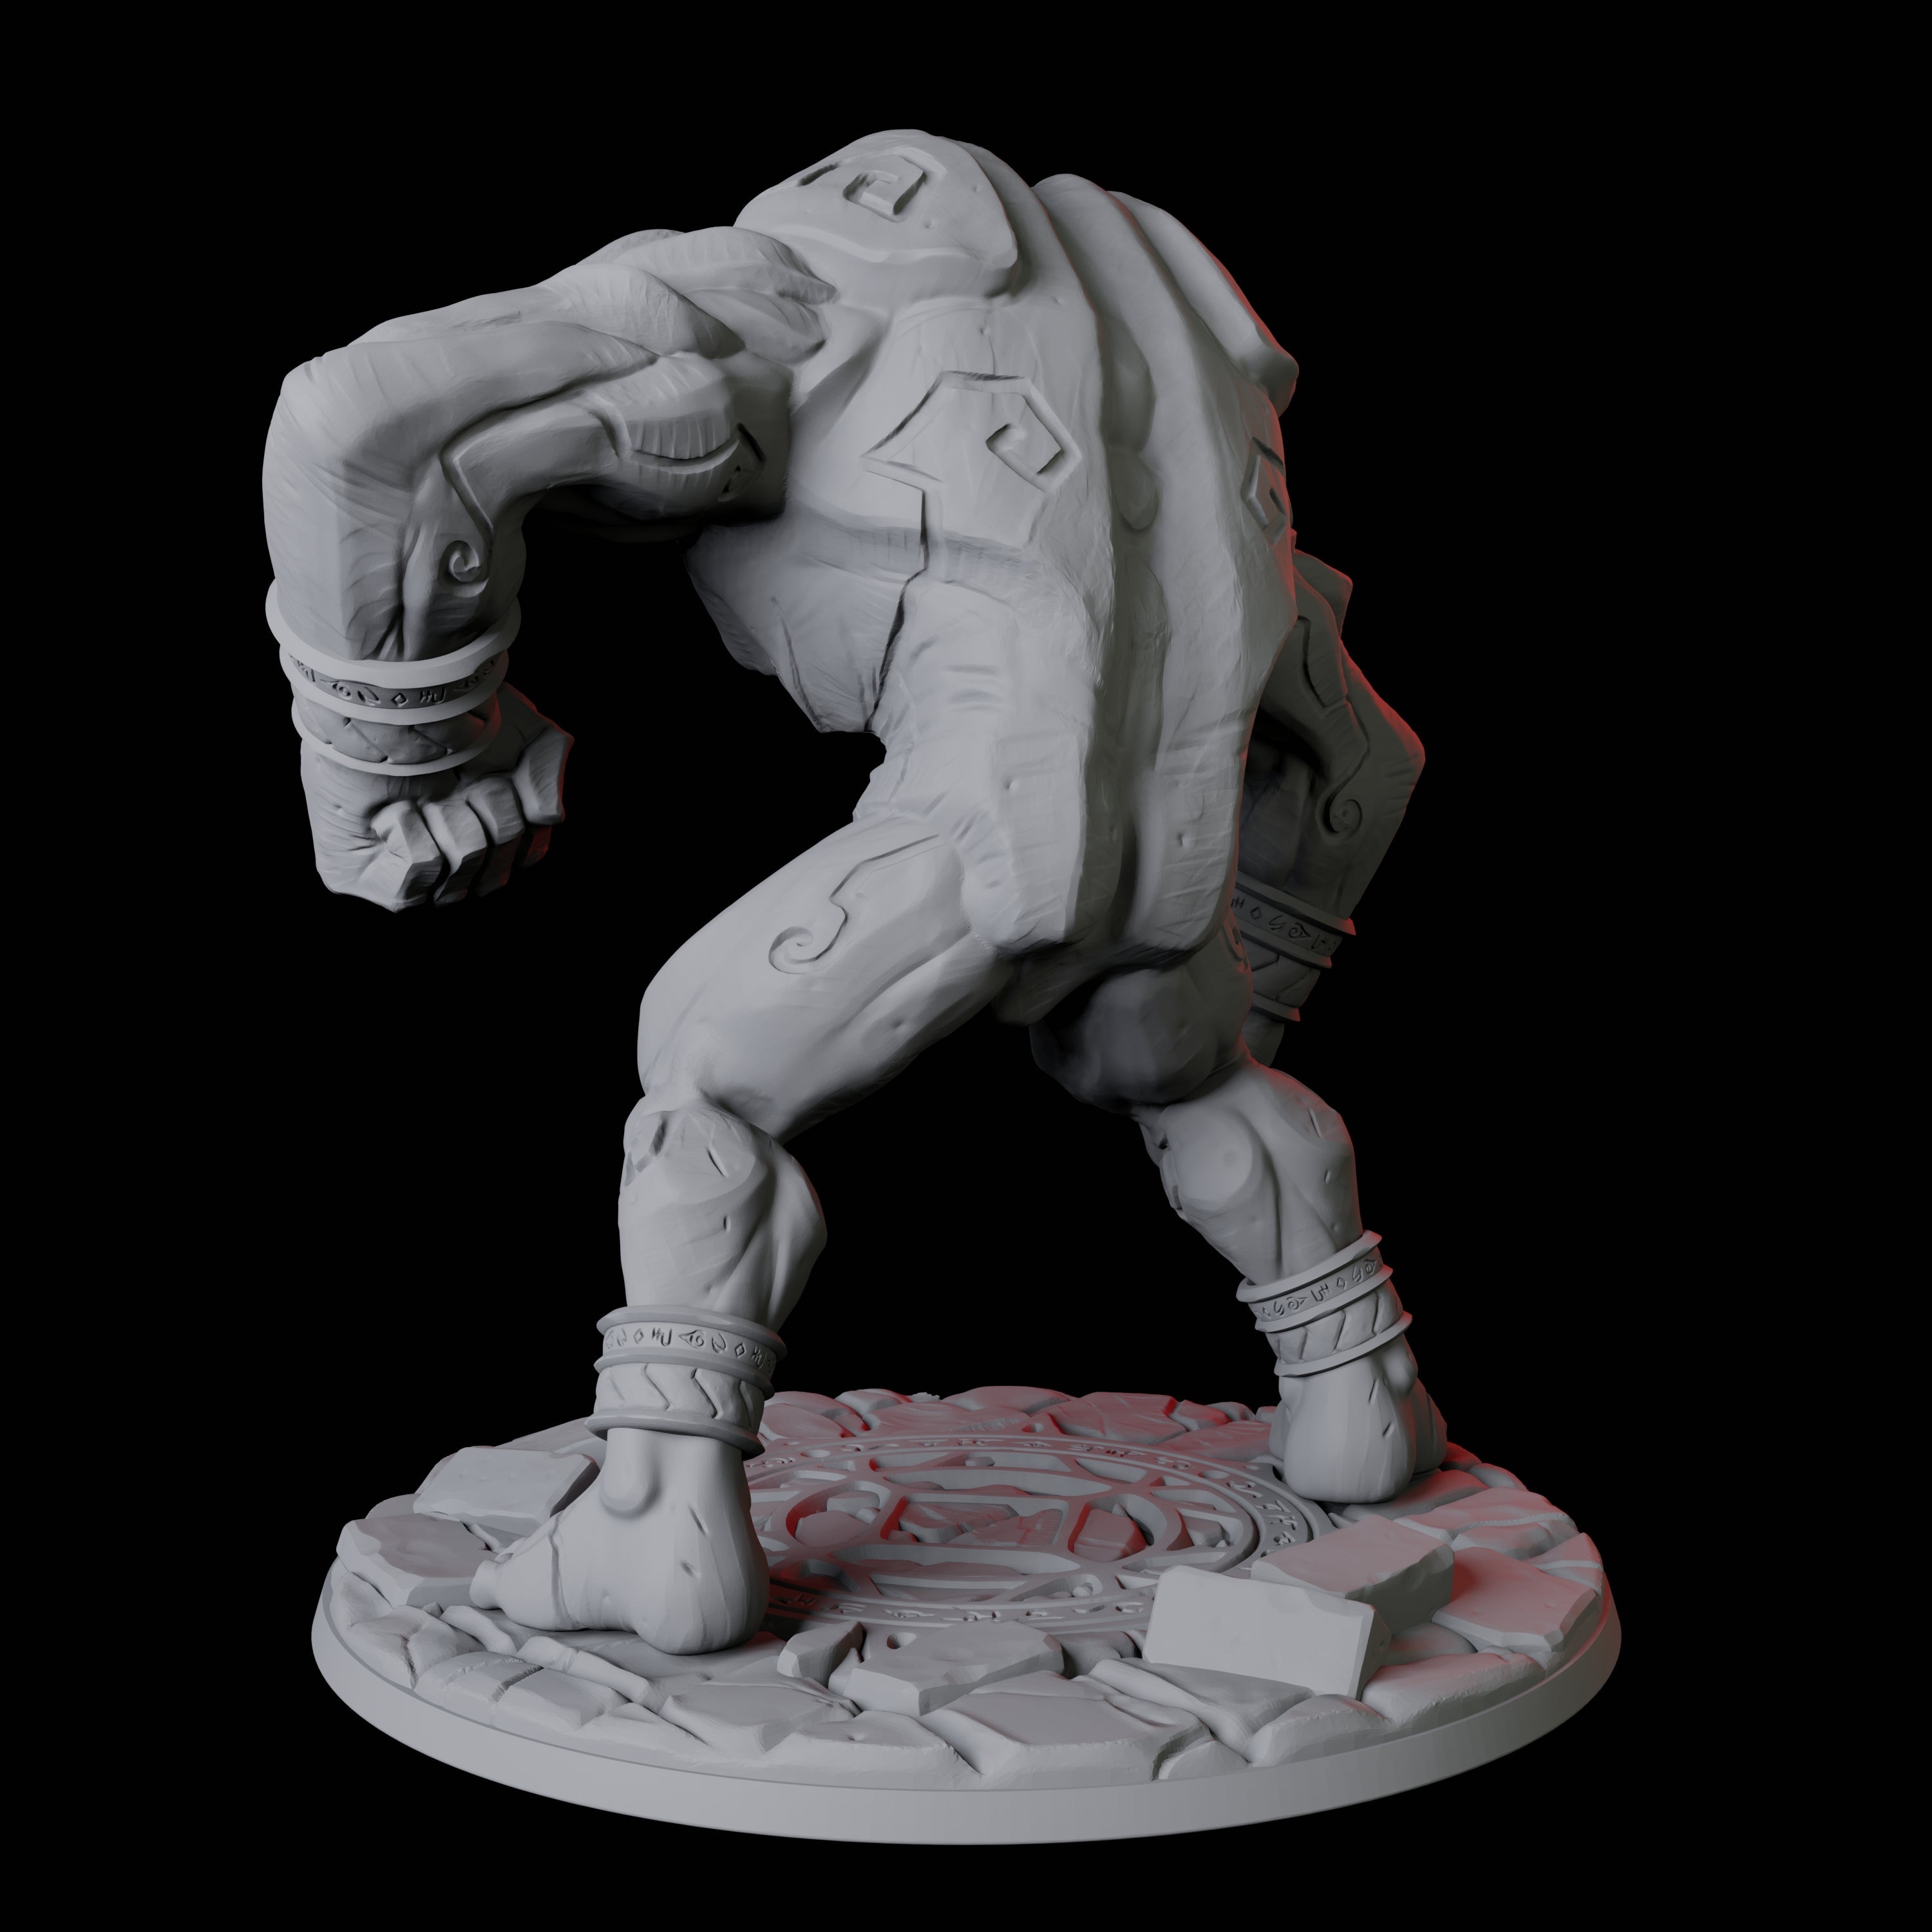 Activated Stone Golem Miniature for Dungeons and Dragons, Pathfinder or other TTRPGs